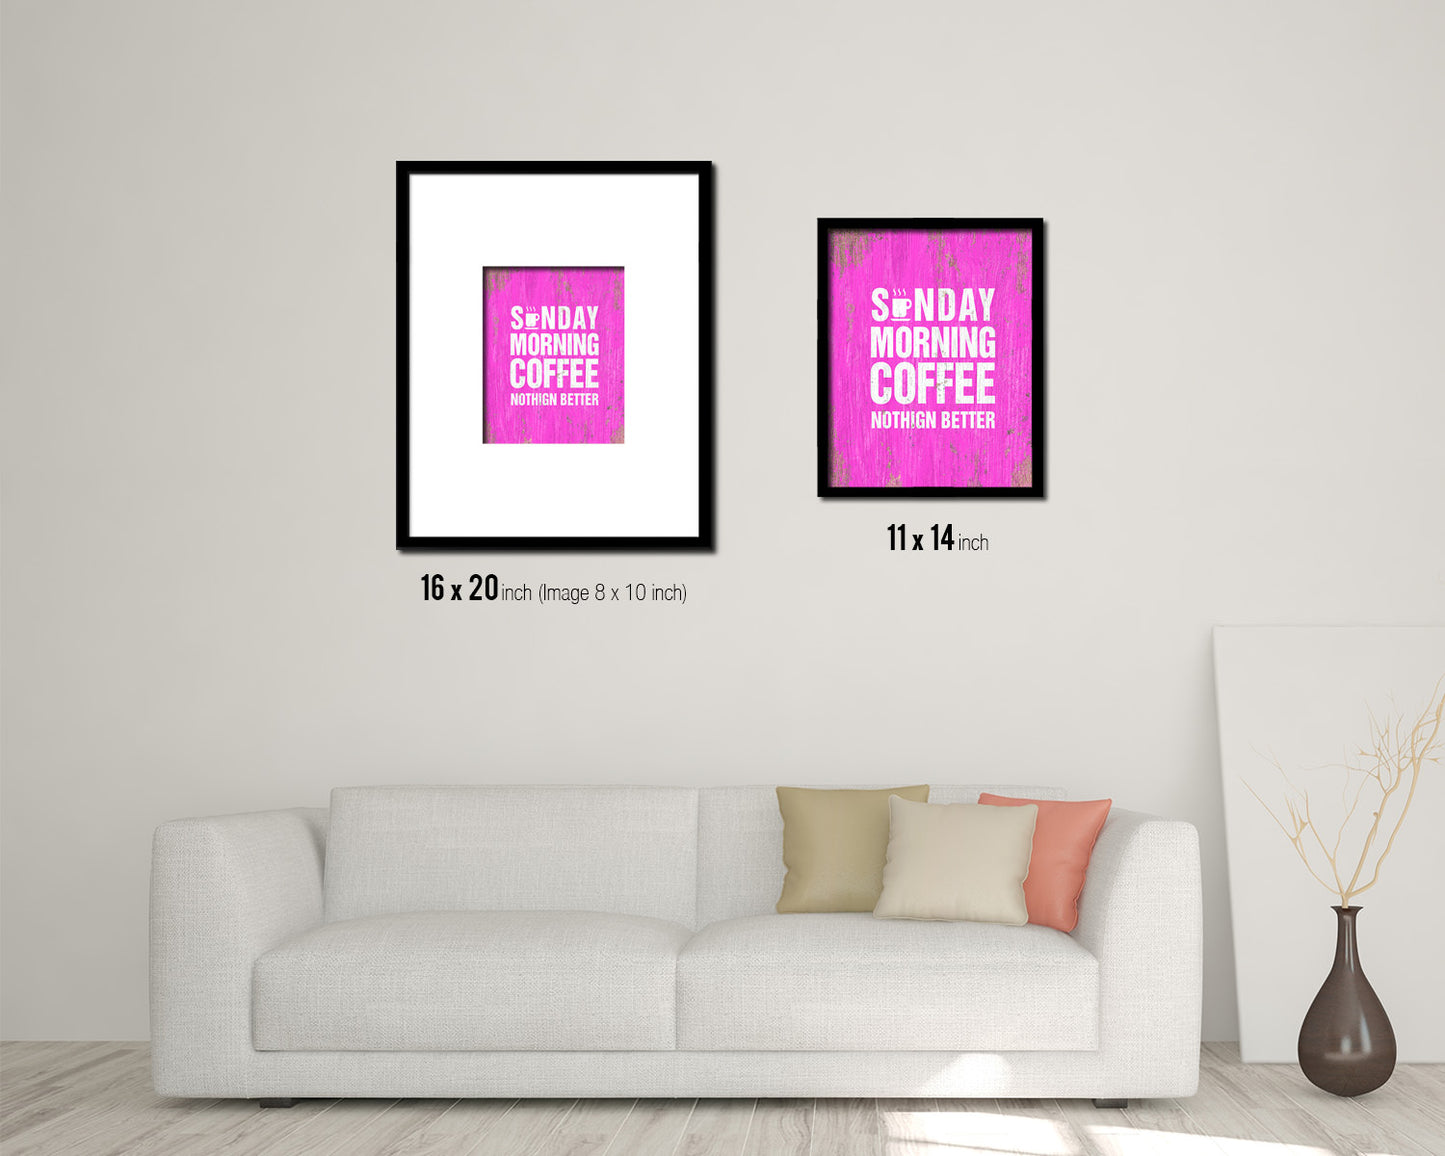 Sunday morning coffee nothing better Quotes Framed Print Home Decor Wall Art Gifts